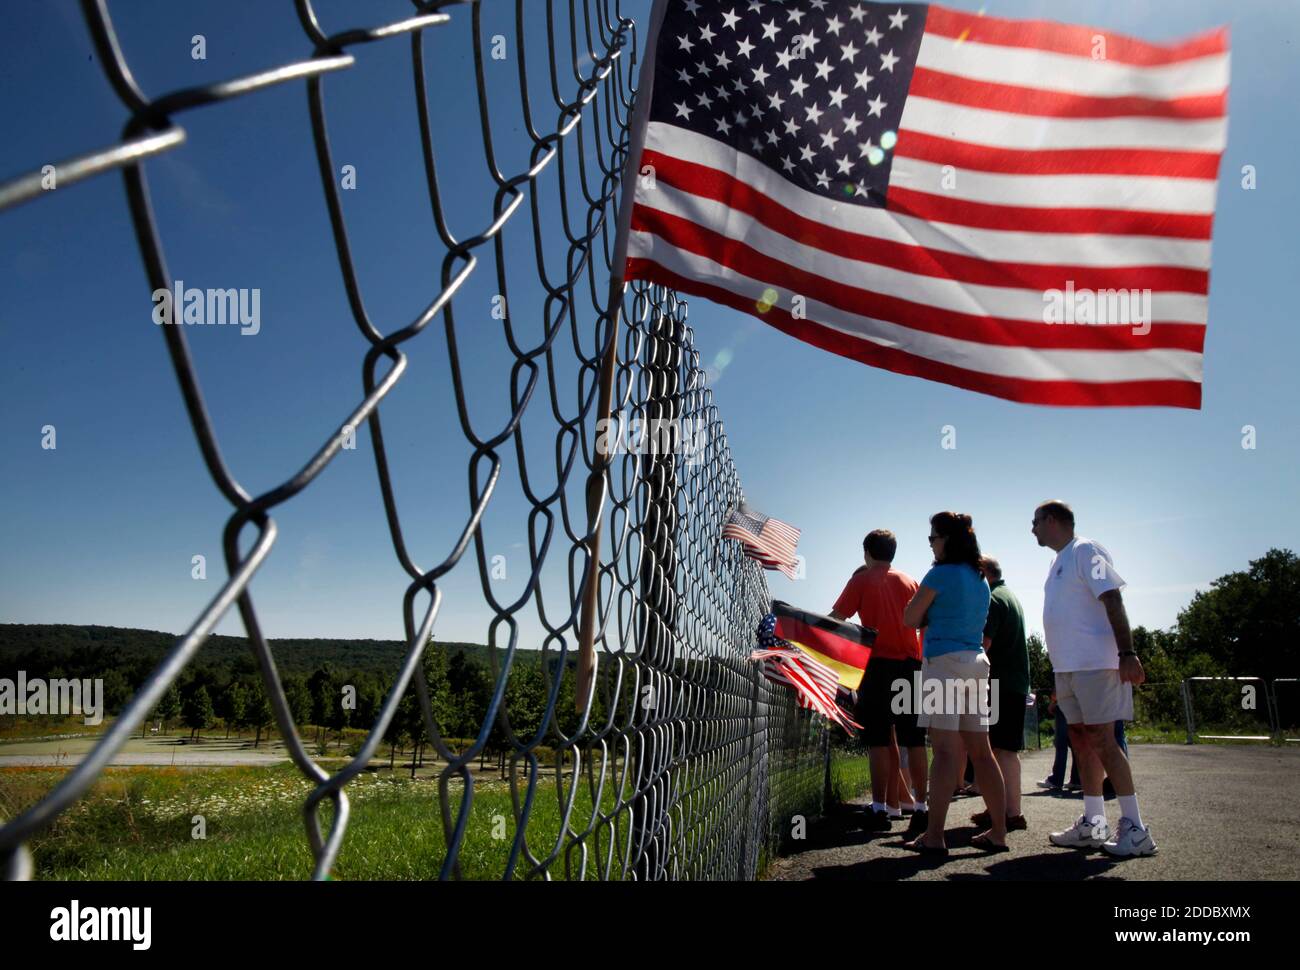 NO FILM, NO VIDEO, NO TV, NO DOCUMENTARY - Visitors peer past the fence to the Flight 93 National Memorial, at the sacred ground of the Flight 93 crash site and the newly completed memorial in Shanksville, Pennsylvania, USA on Friday afternoon, August 12, 2011. The memorial will open to the public on September 10. Photo by Laurence Kesterson/Philadelphia Inquirer/MCT/ABACAPRESS.COM Stock Photo